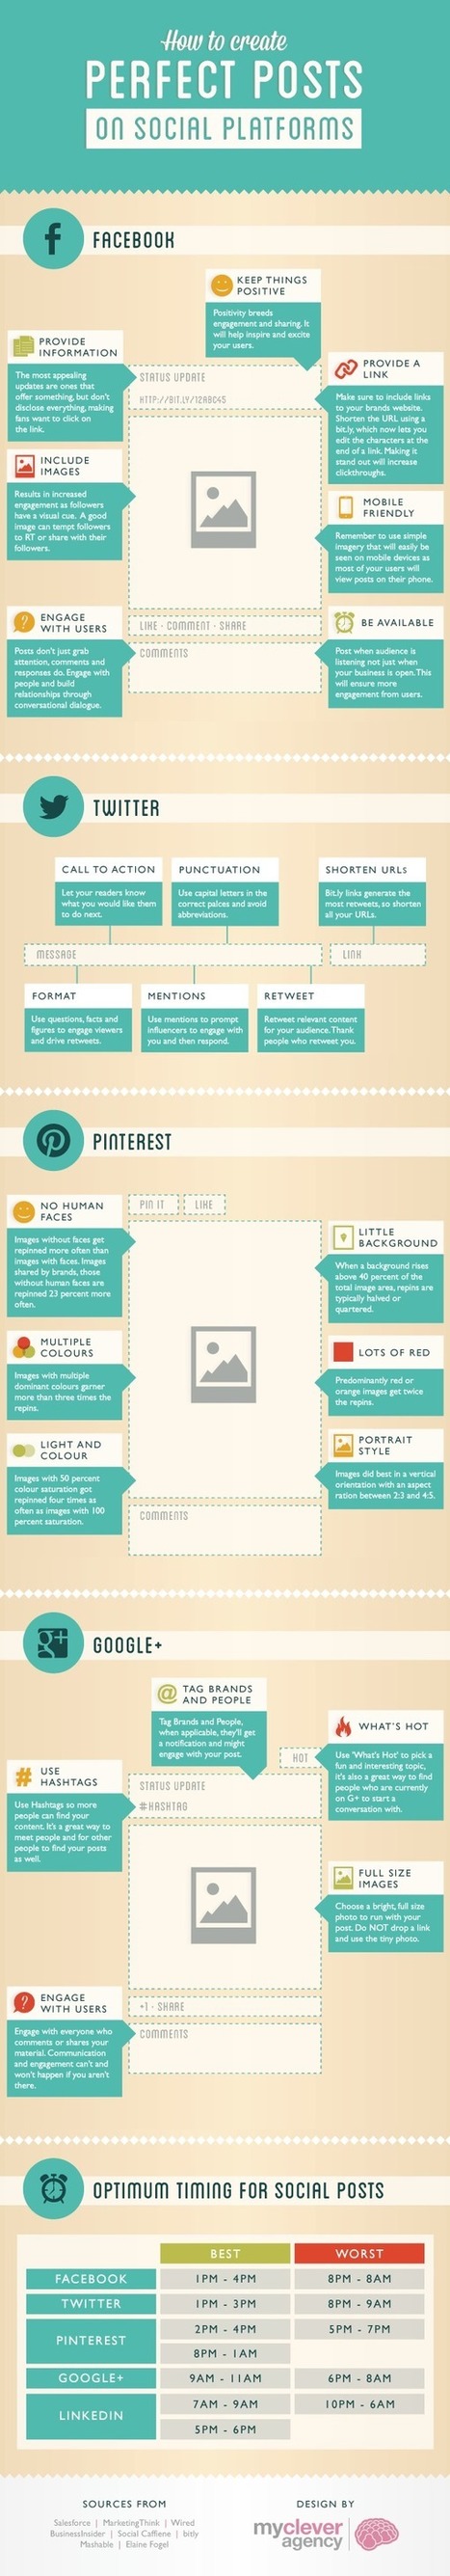 How To Create Perfect Posts On Social Platforms | Business 2 Community | World's Best Infographics | Scoop.it